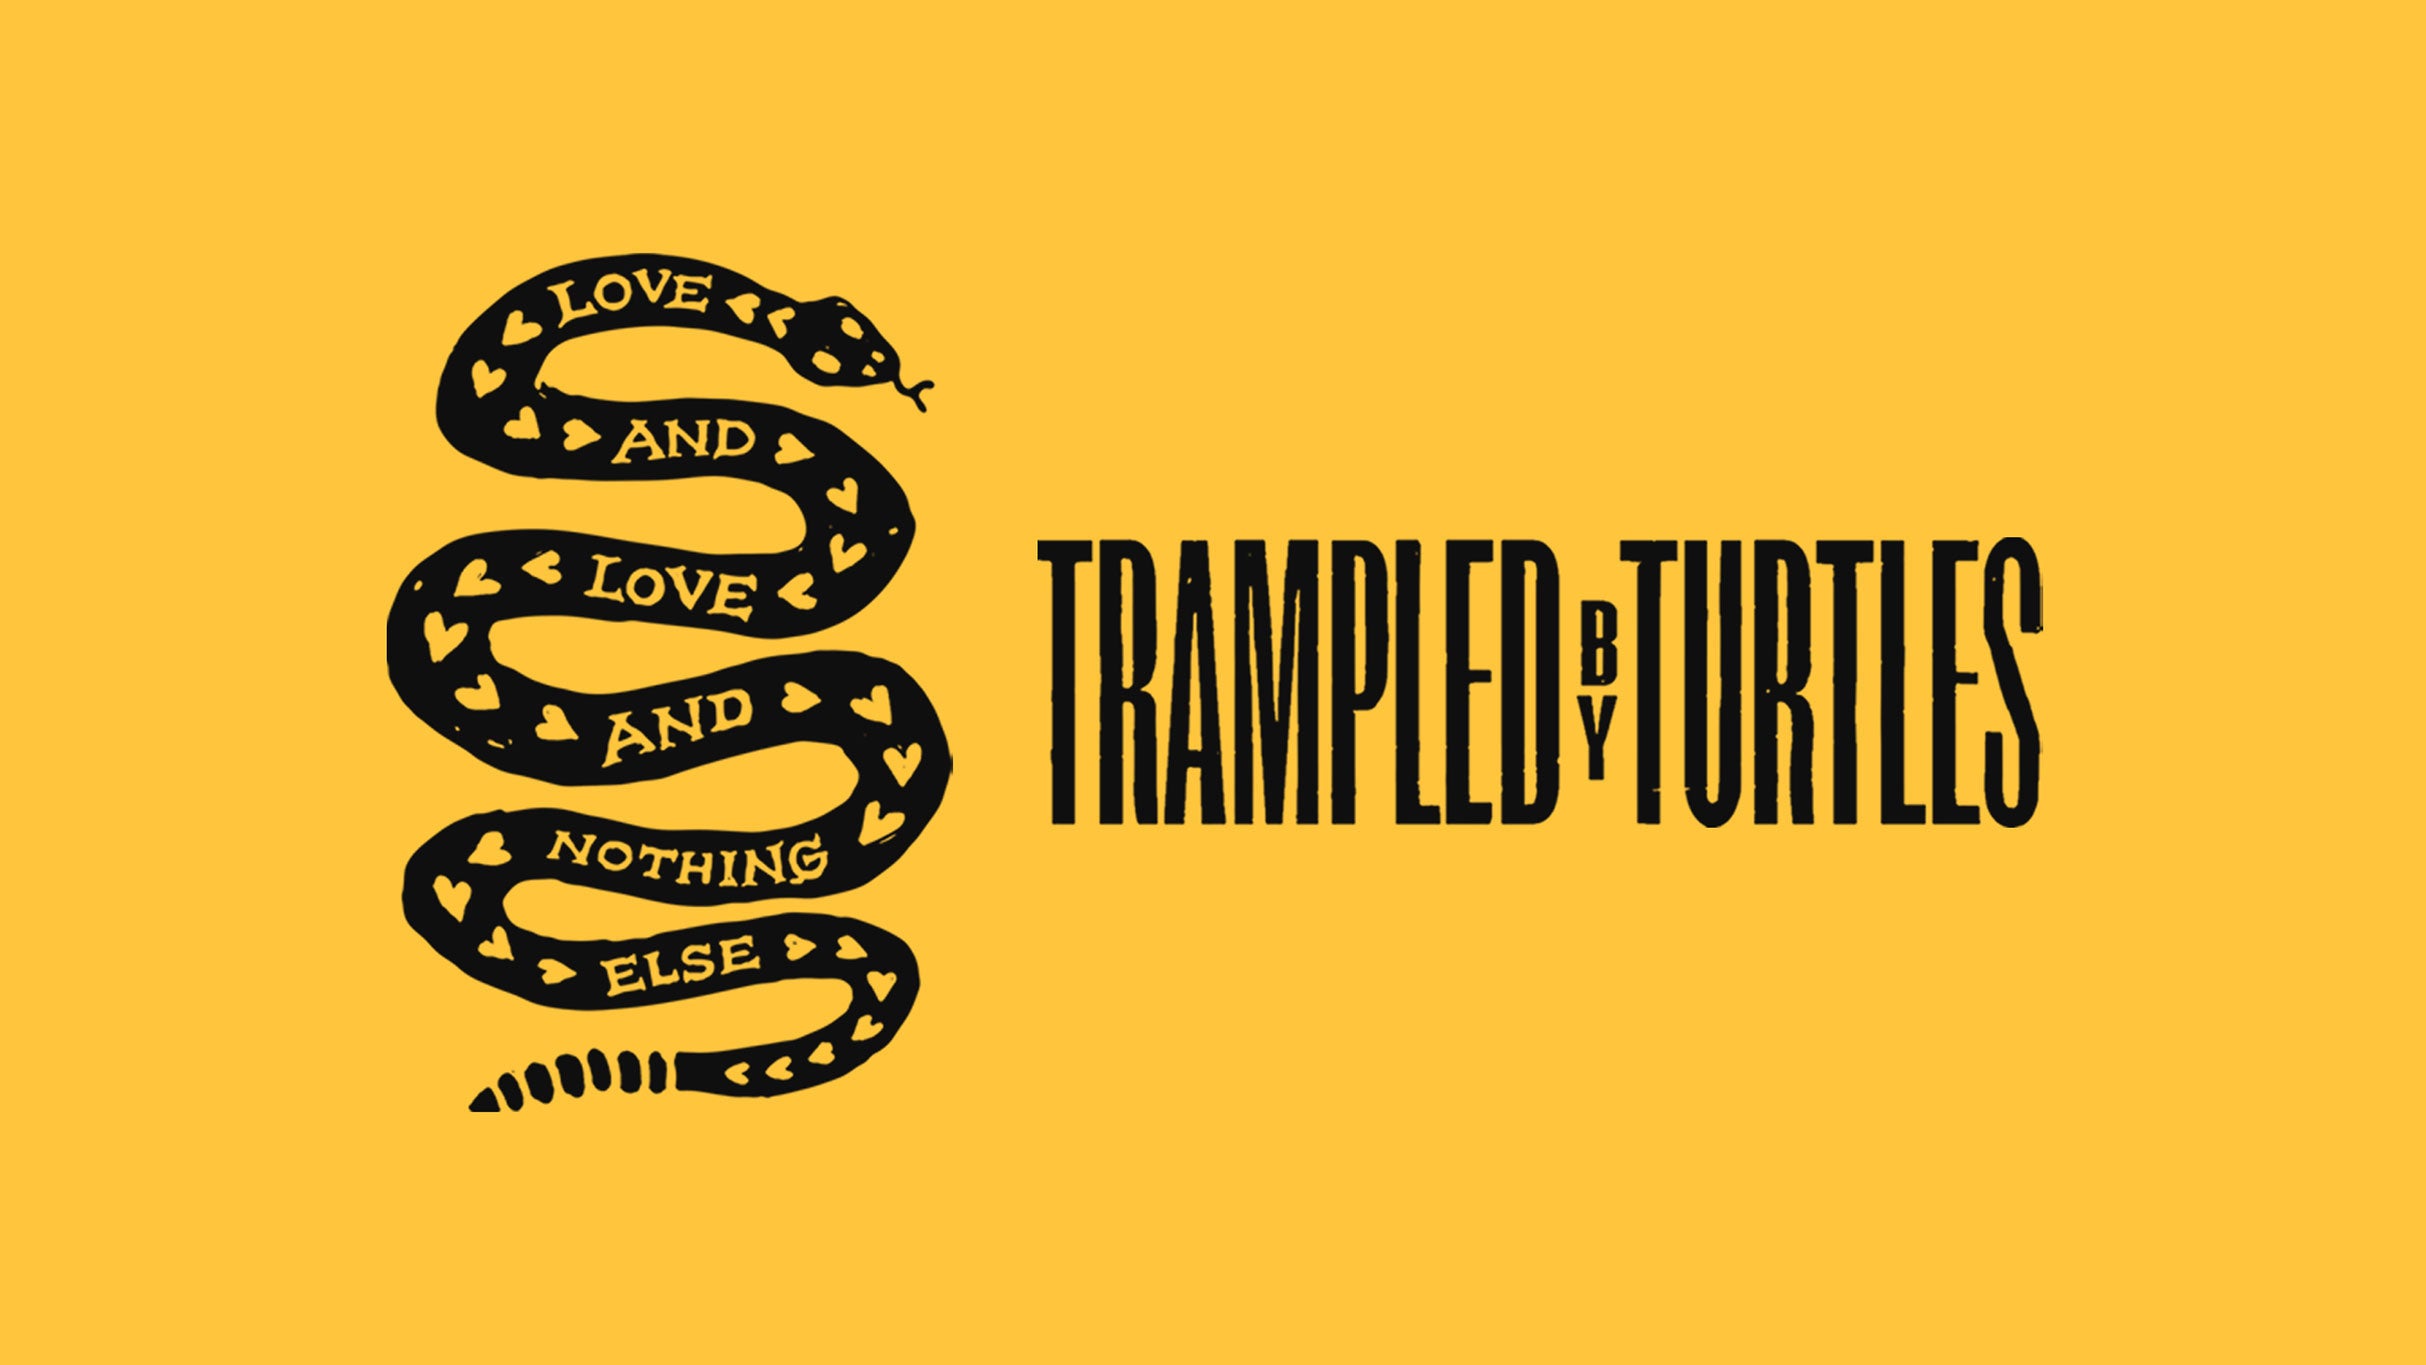 Trampled By Turtles presale code for event tickets in Tampa, FL (The Ritz Ybor)